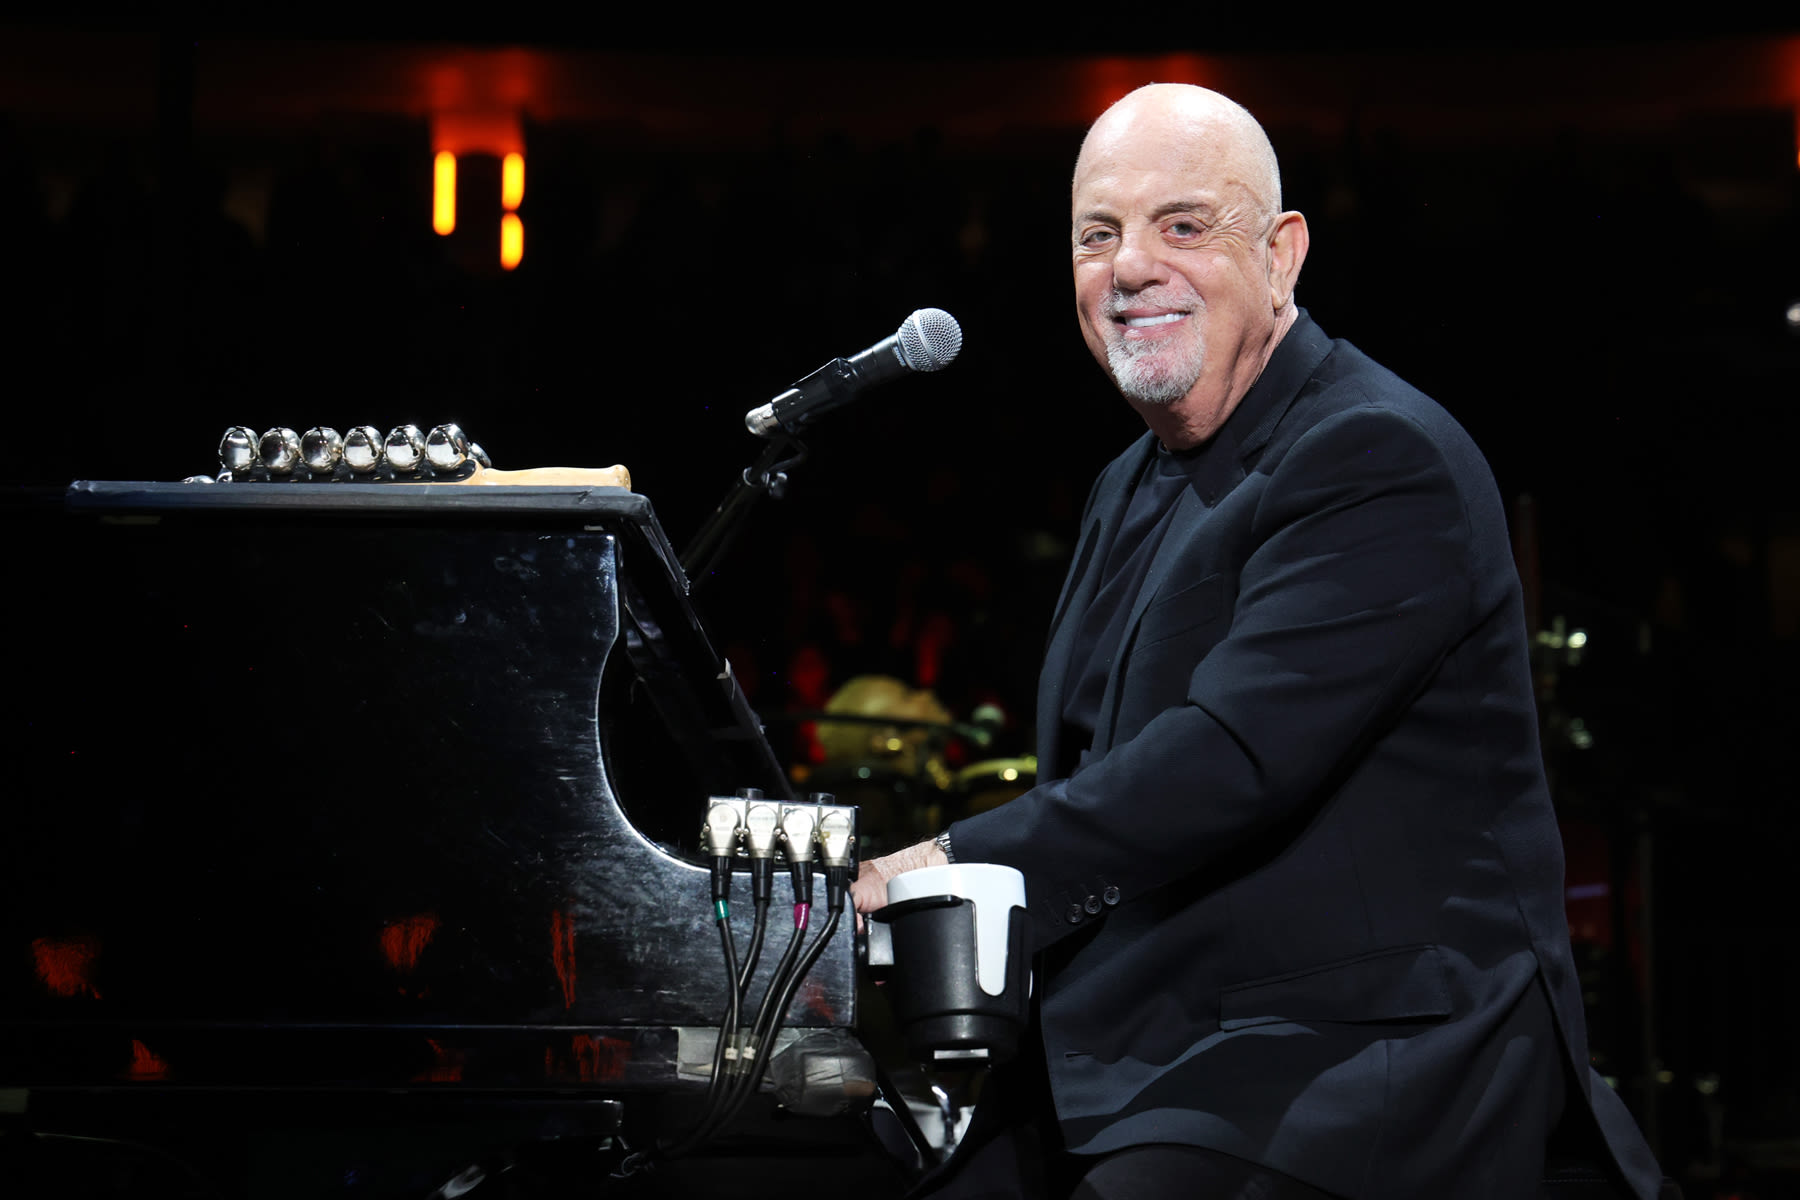 Here’s Where to Watch Billy Joel’s Madison Square Garden Concert Special Online